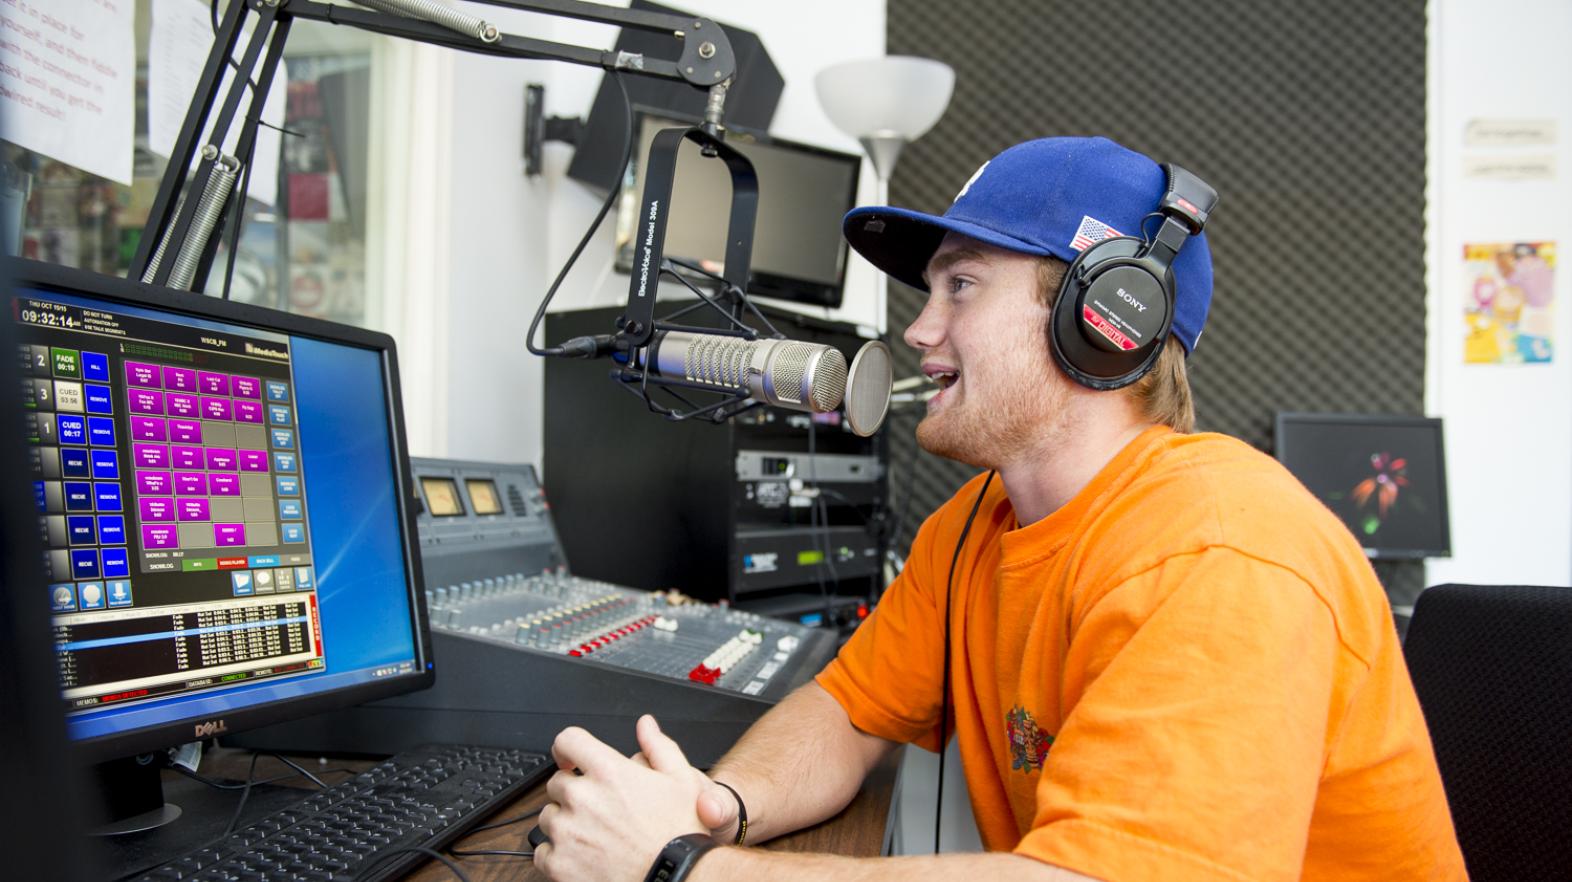 A student works in the on-campus radio station